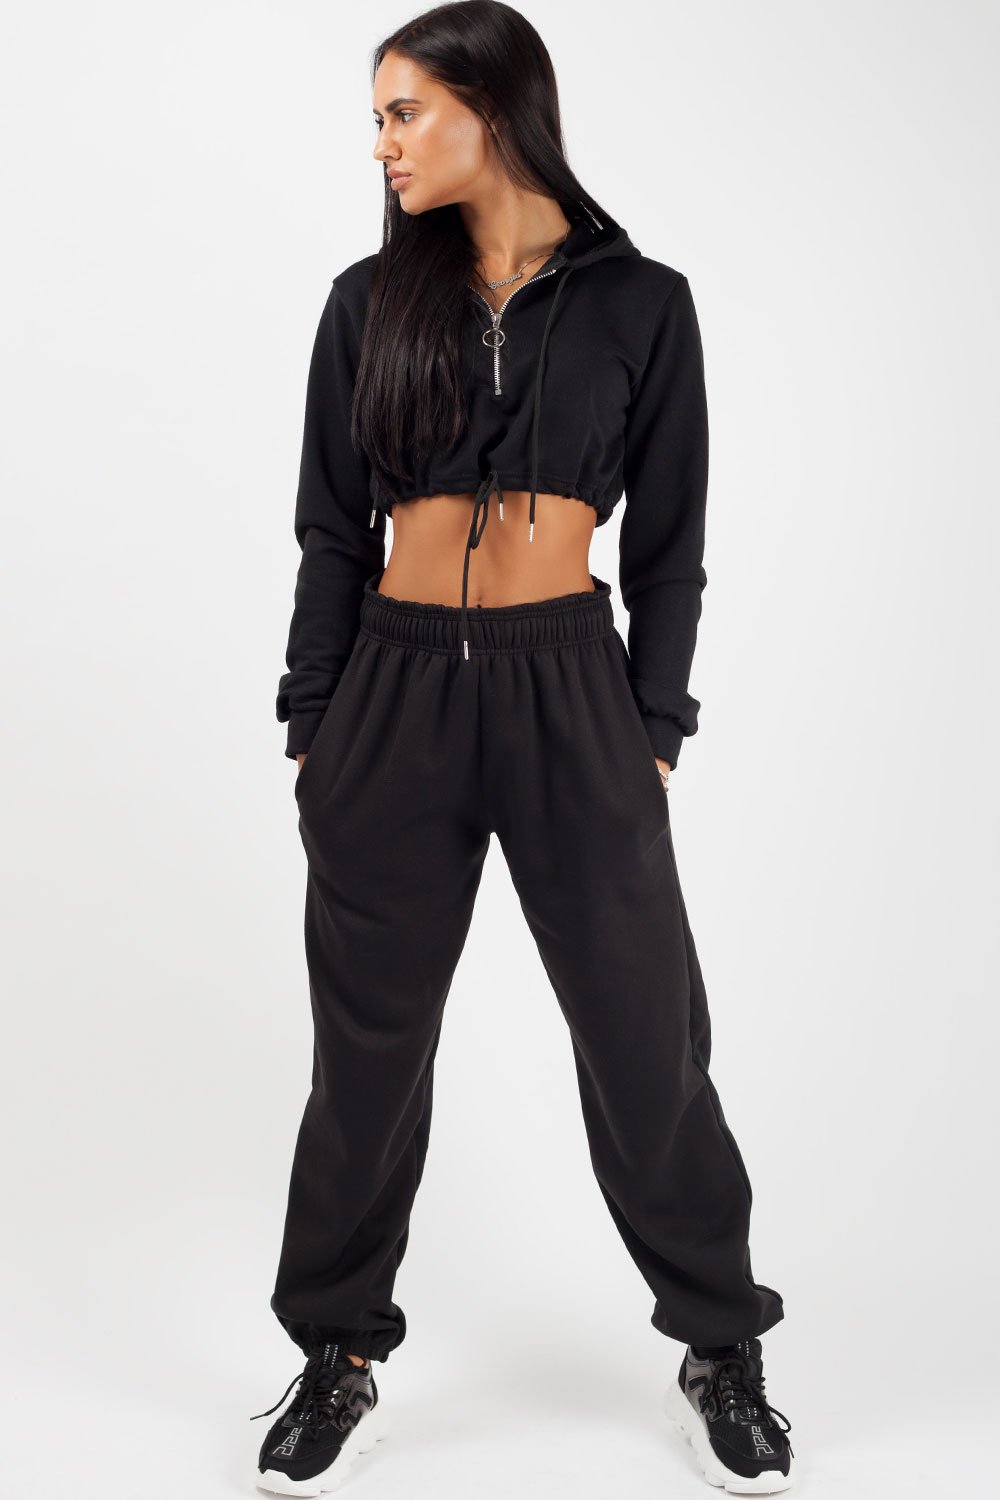 Black Oversized Joggers - Erica  Trendy outfits, Black joggers